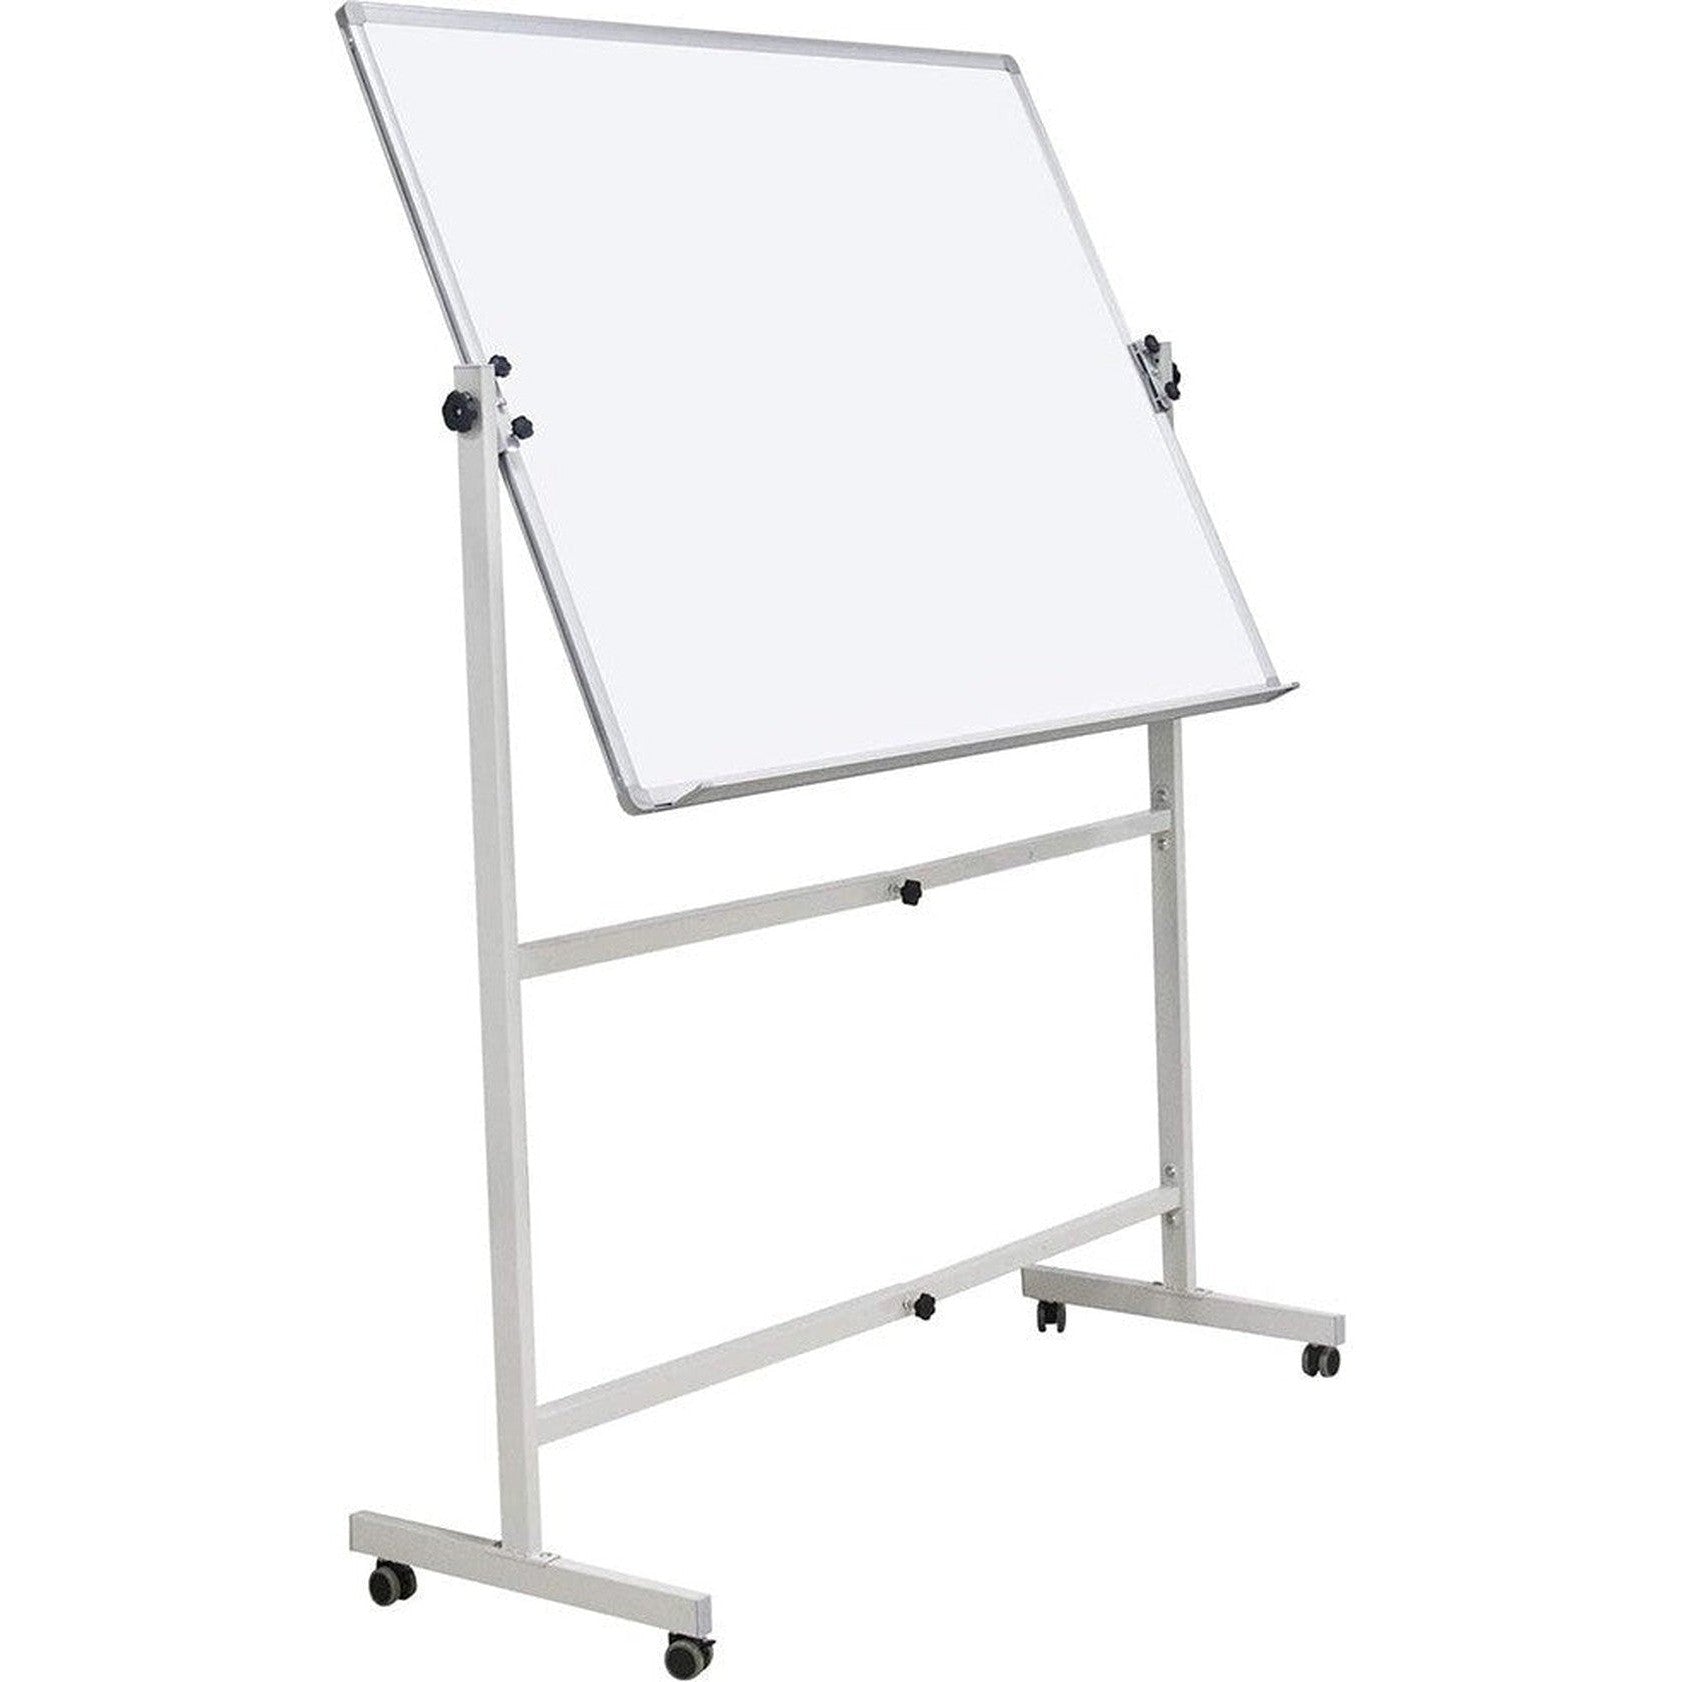 120Cm X 240Cm Whiteboard With Stand-Stationery Cork Boards-Other-Star Light Kuwait